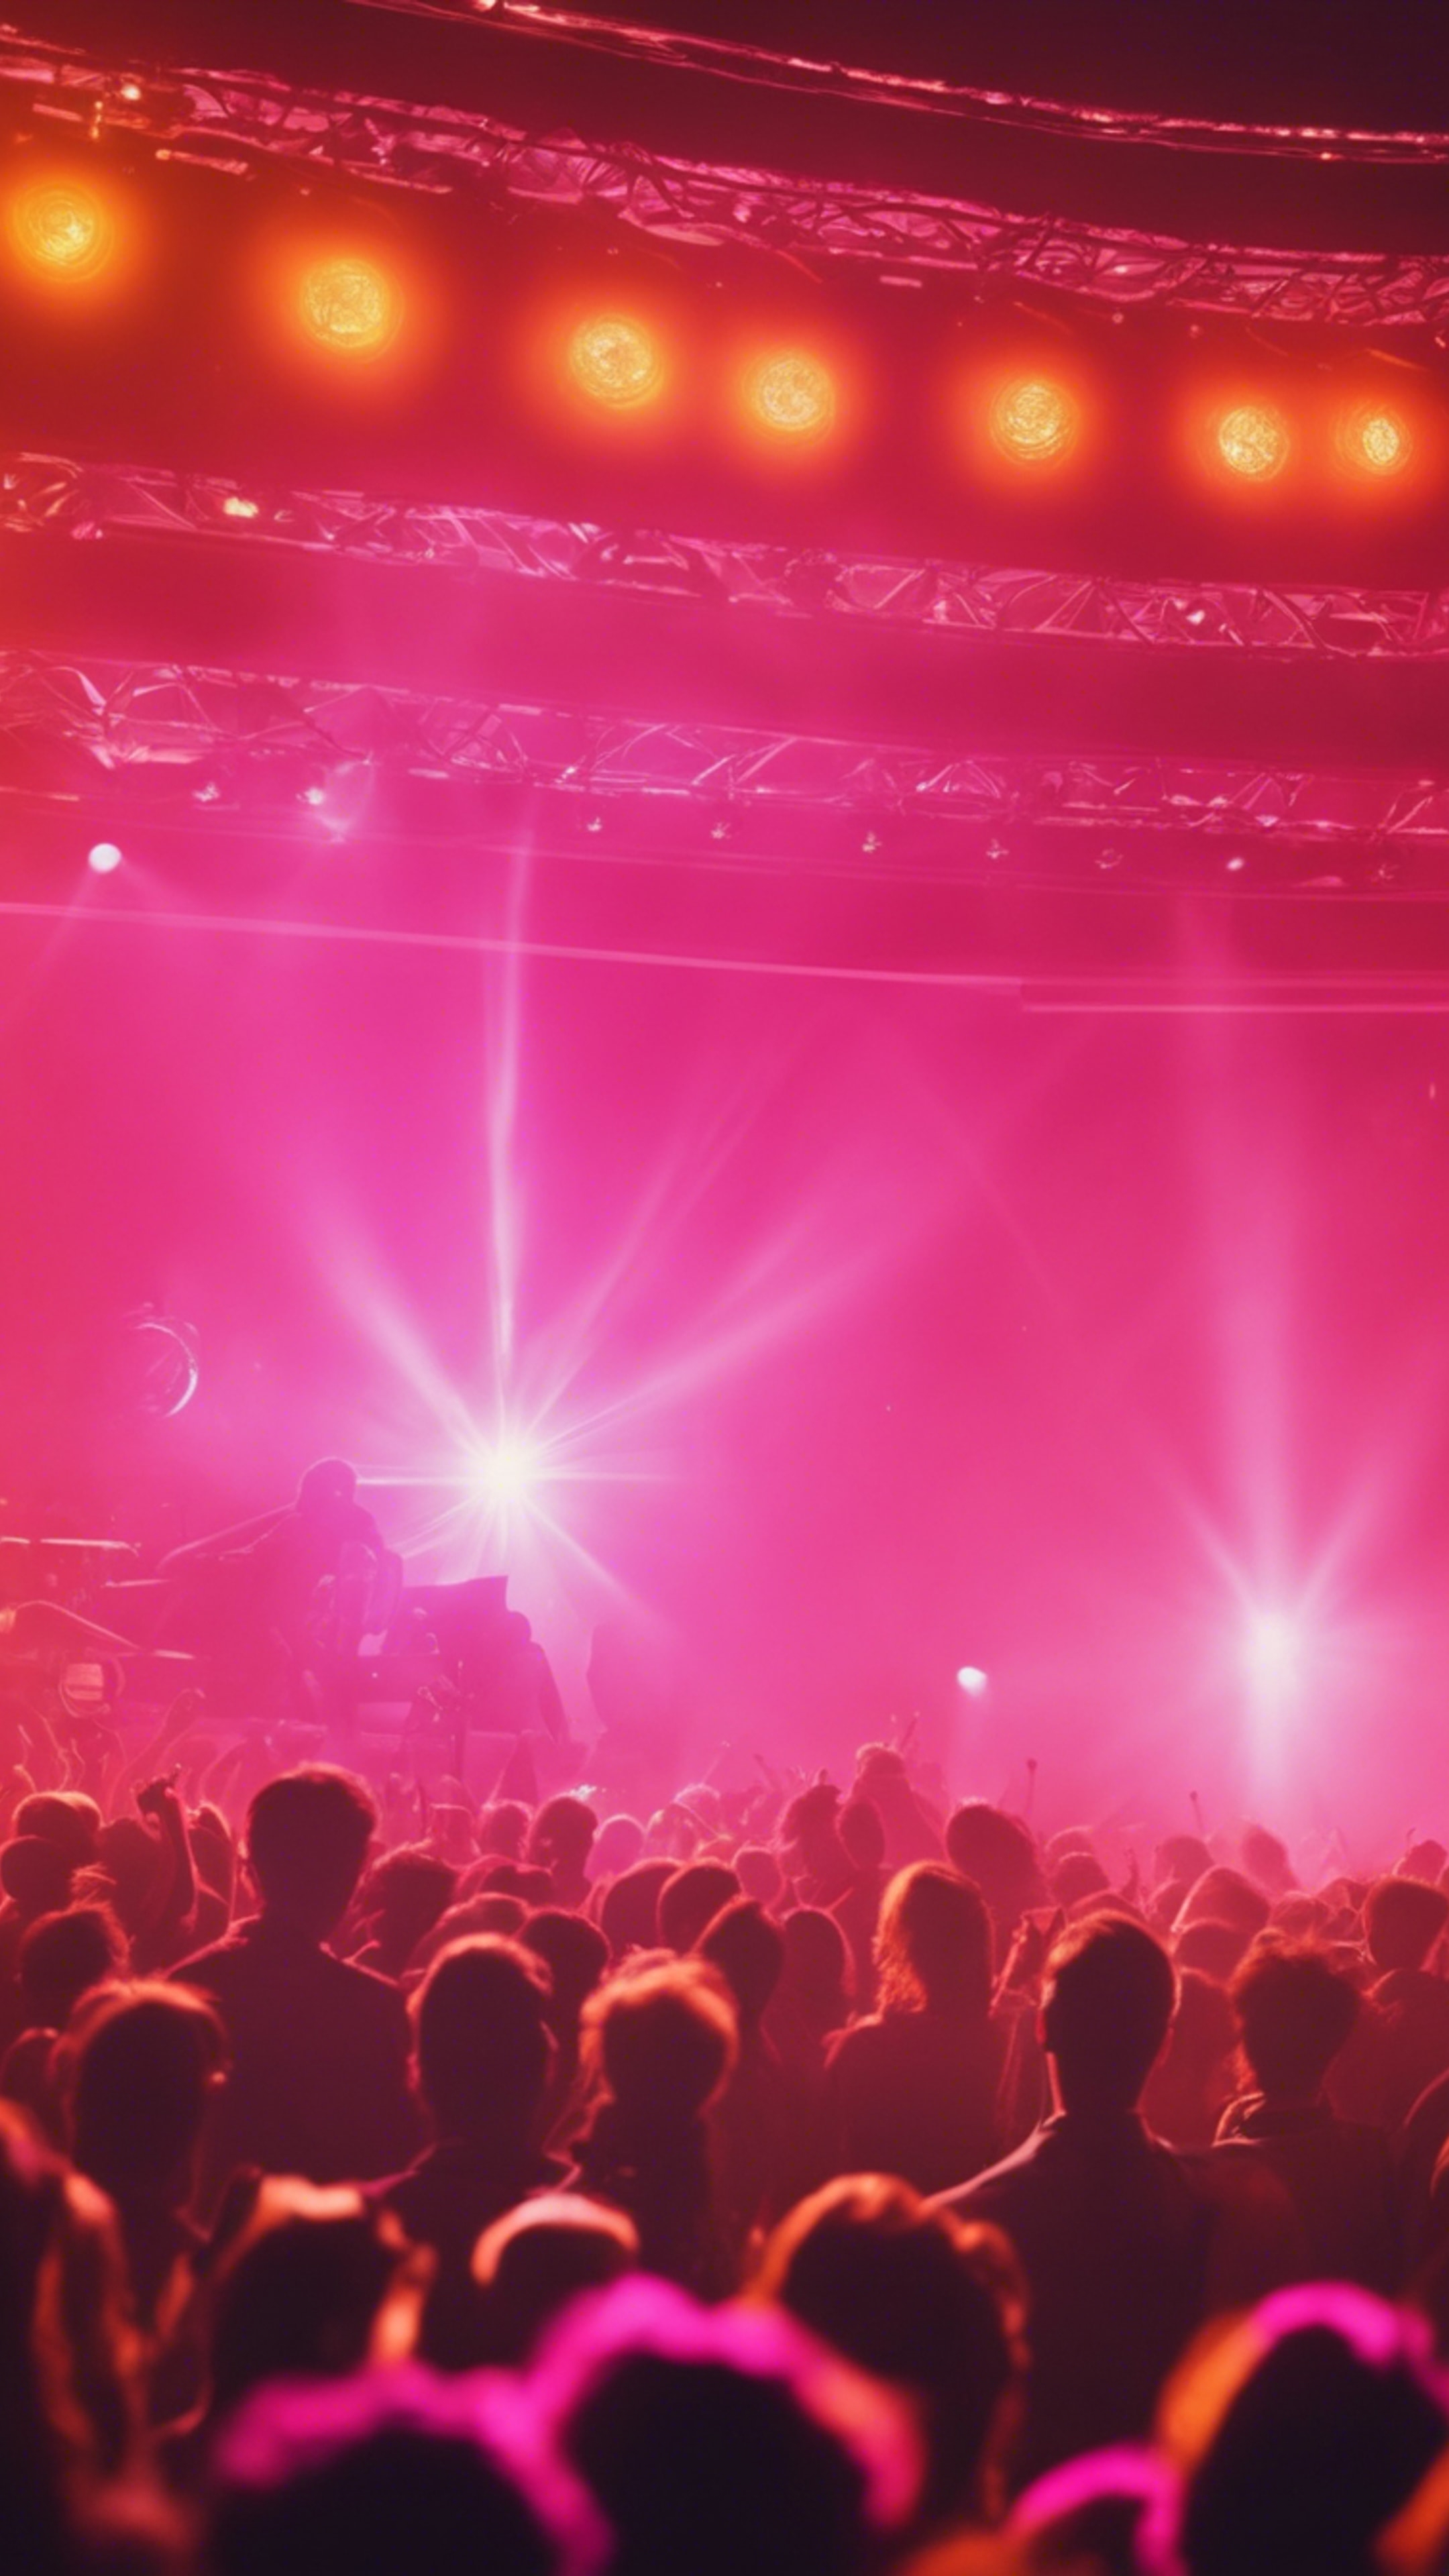 Bright orange flares from an 80s music concert with a pink stage lighting. Wallpaper[6011018ba8cb439fb9ea]